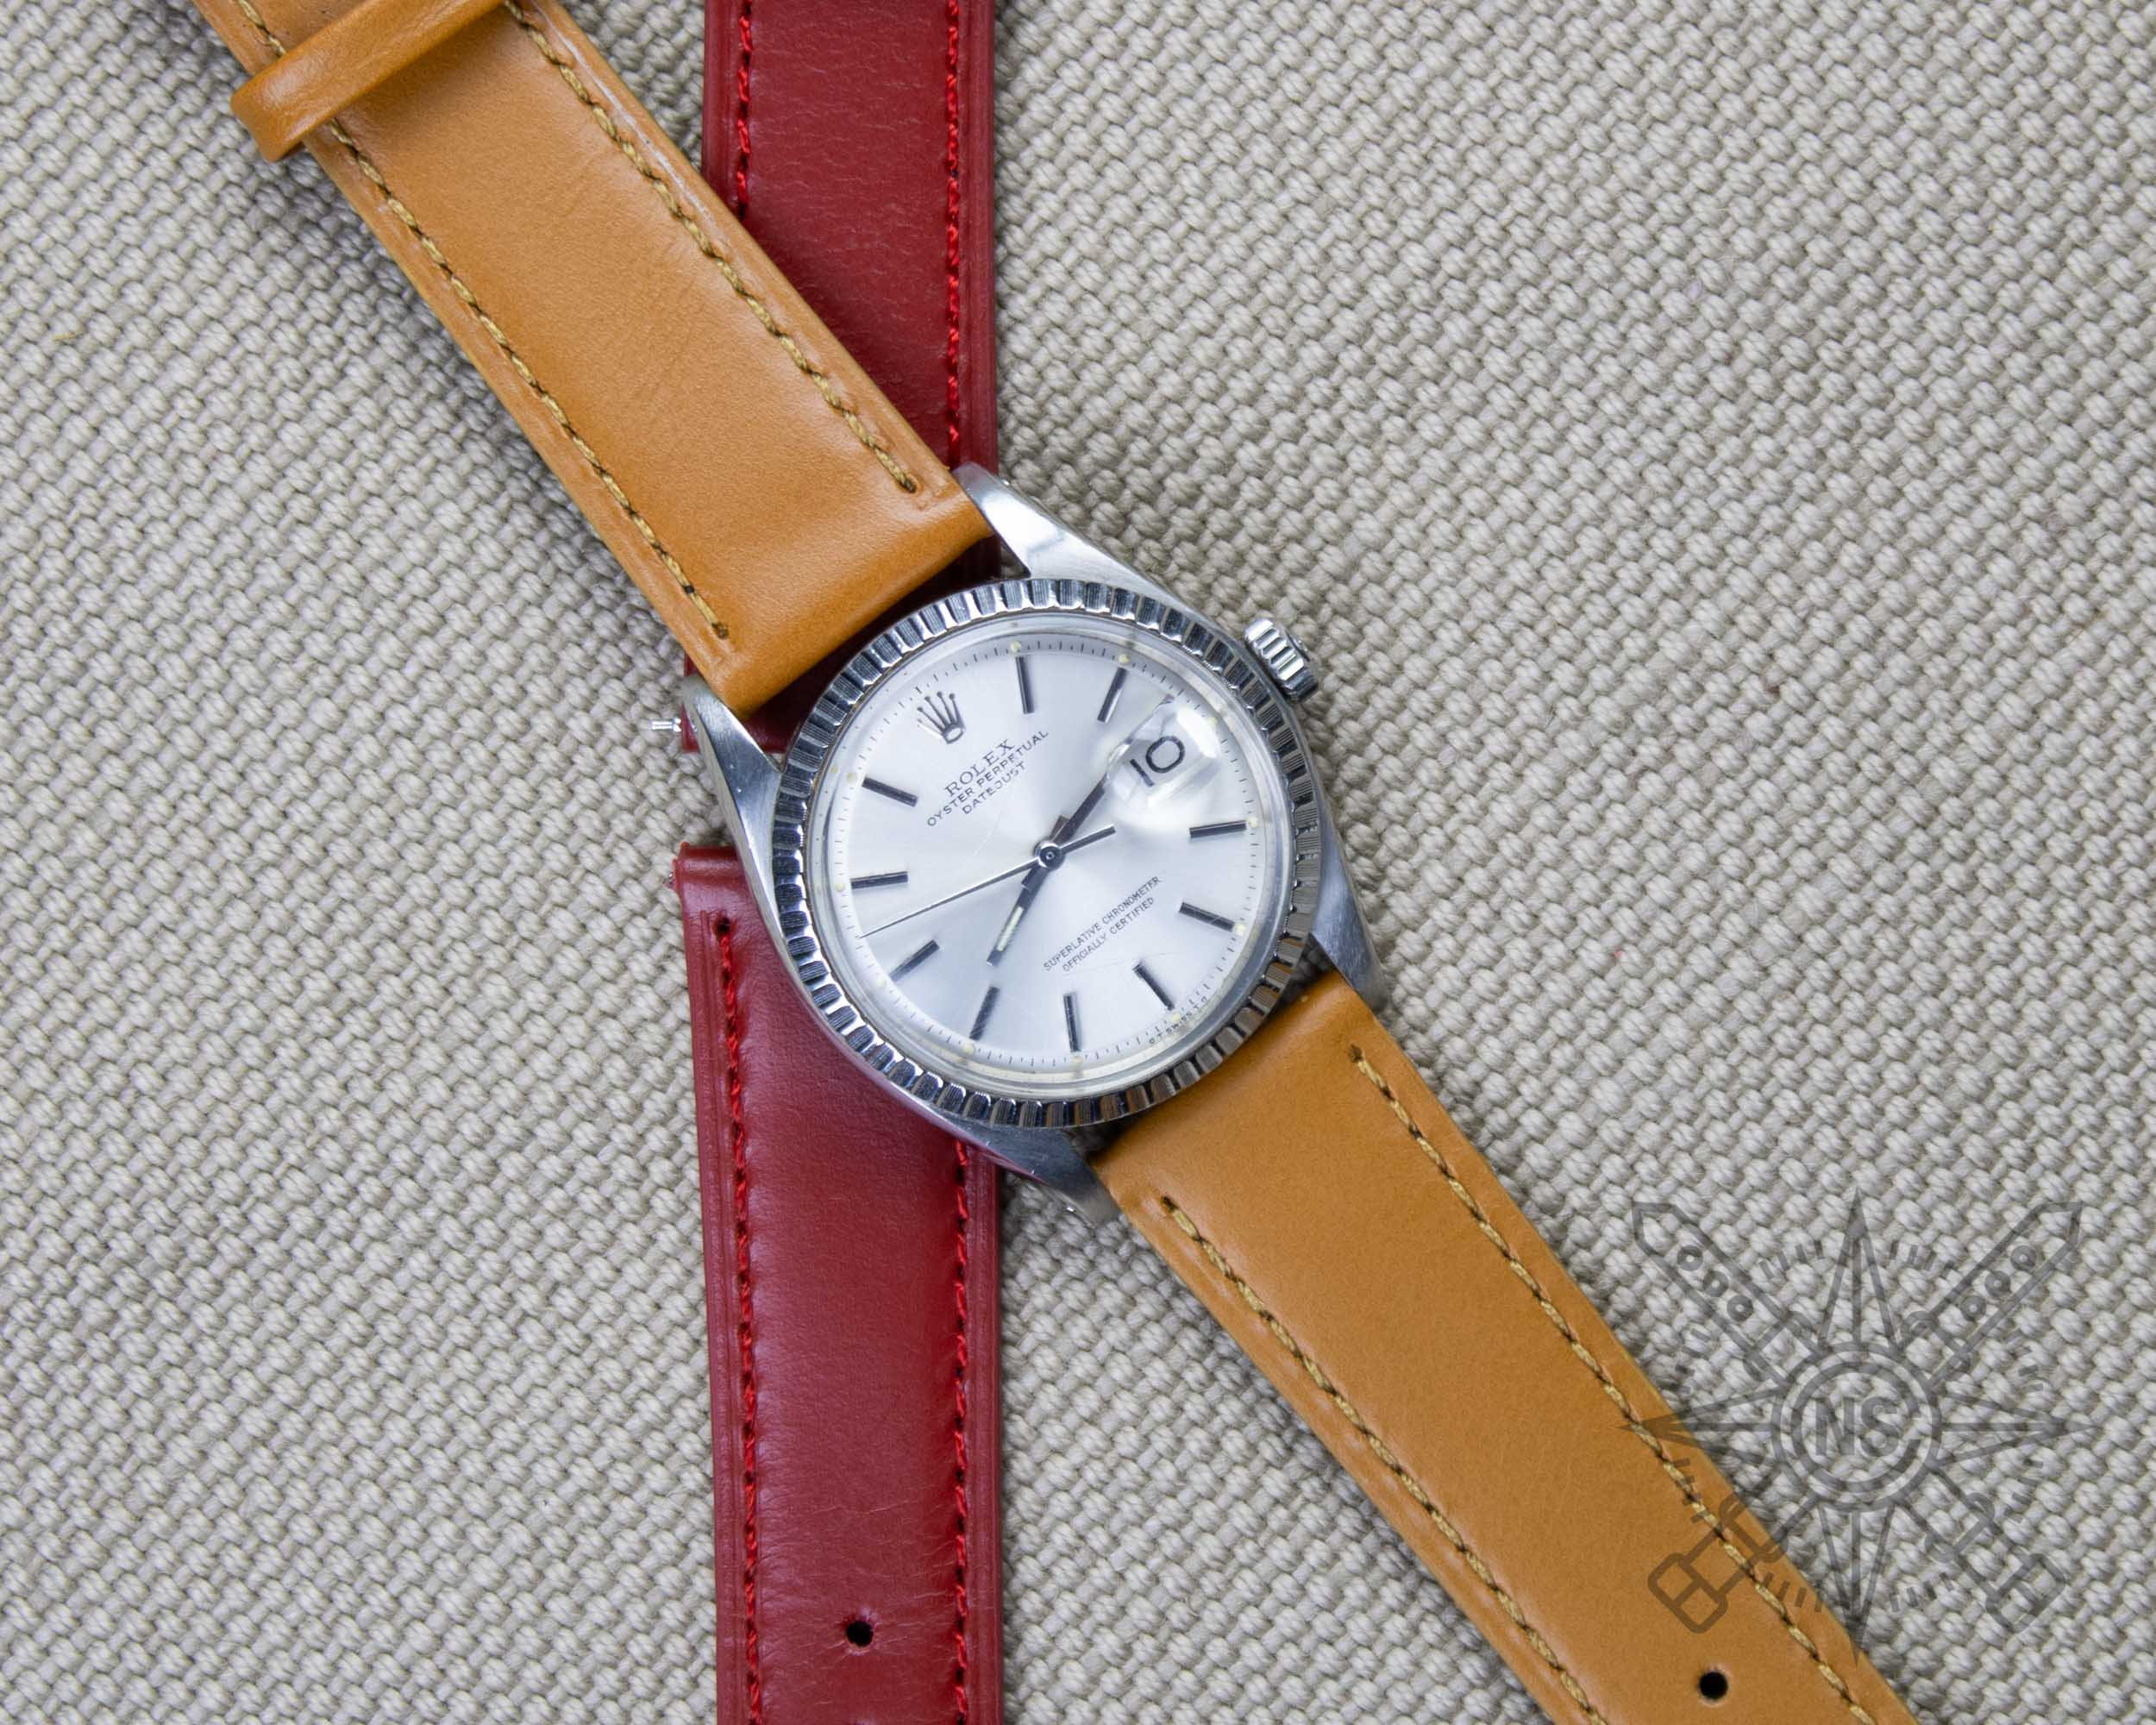 Transforming the look of a watch with a new leather strap